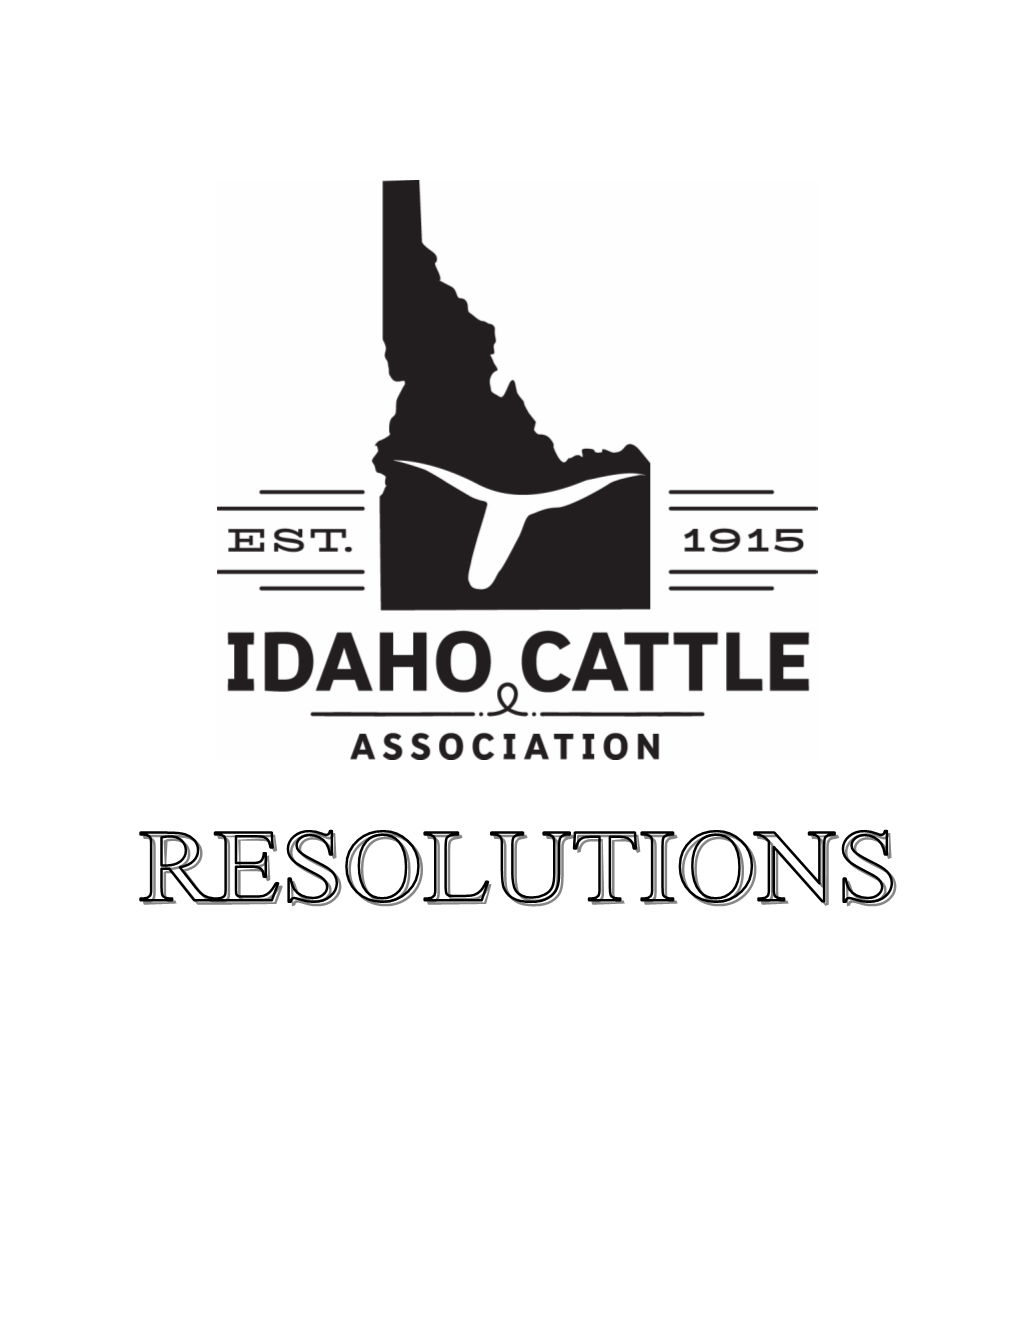 RESOLUTIONS Idaho Cattle Association As Approved at Annual Membership Meeting on November 24, 2020